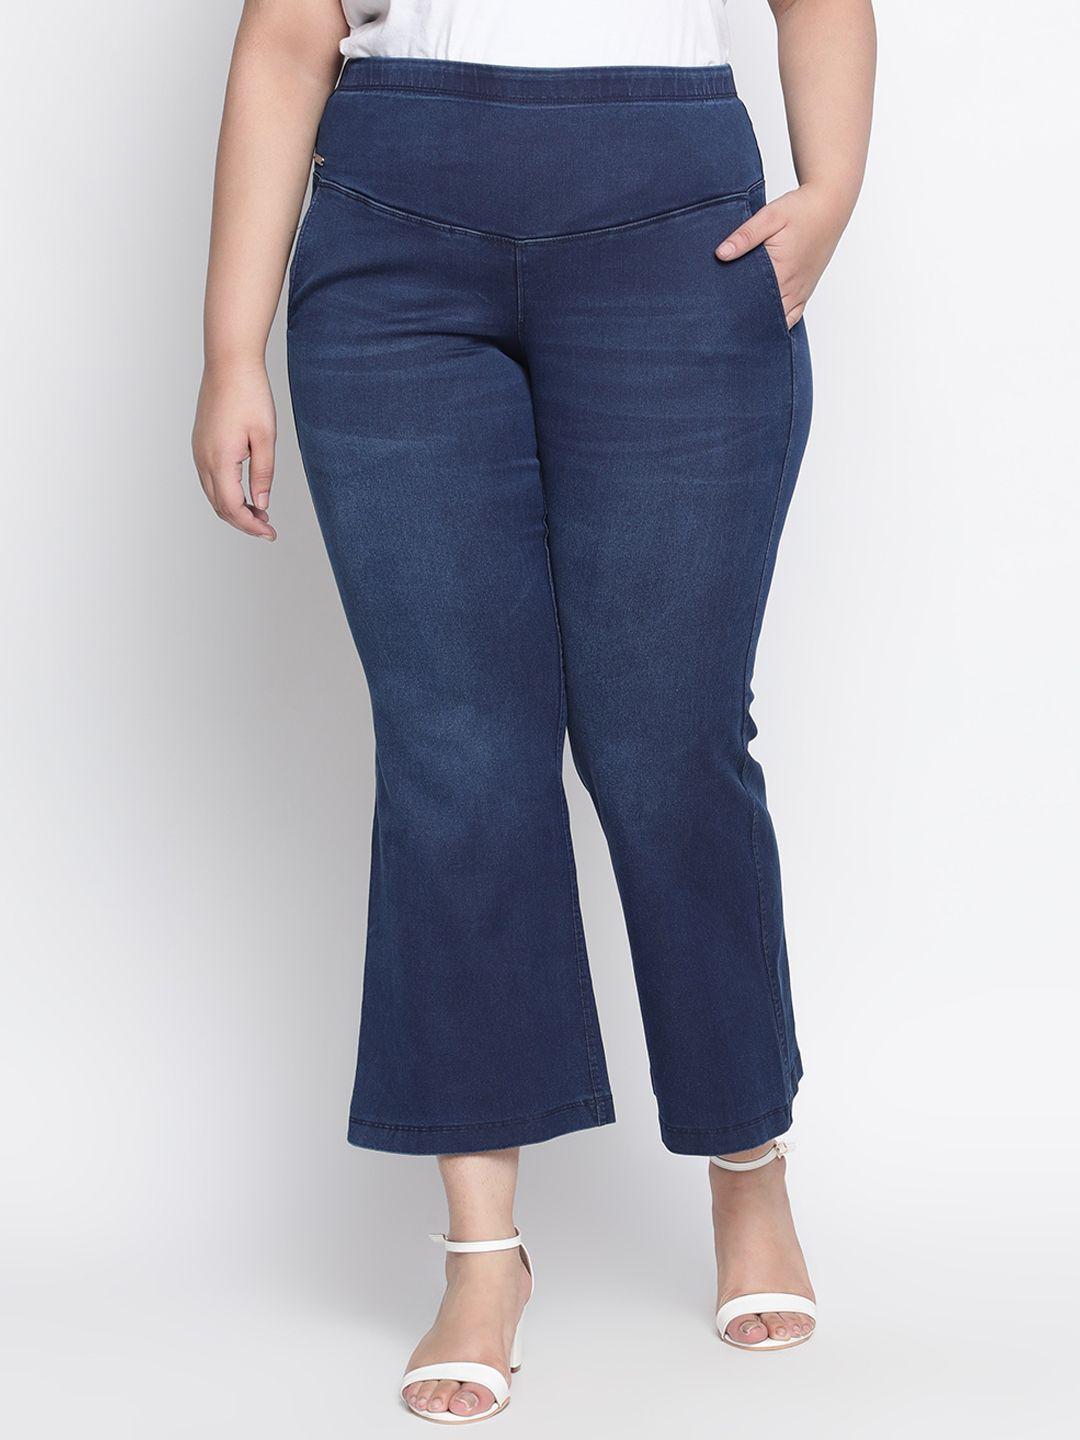 Amydus Women Plus Size Flared High-Rise Stretchable Jeans